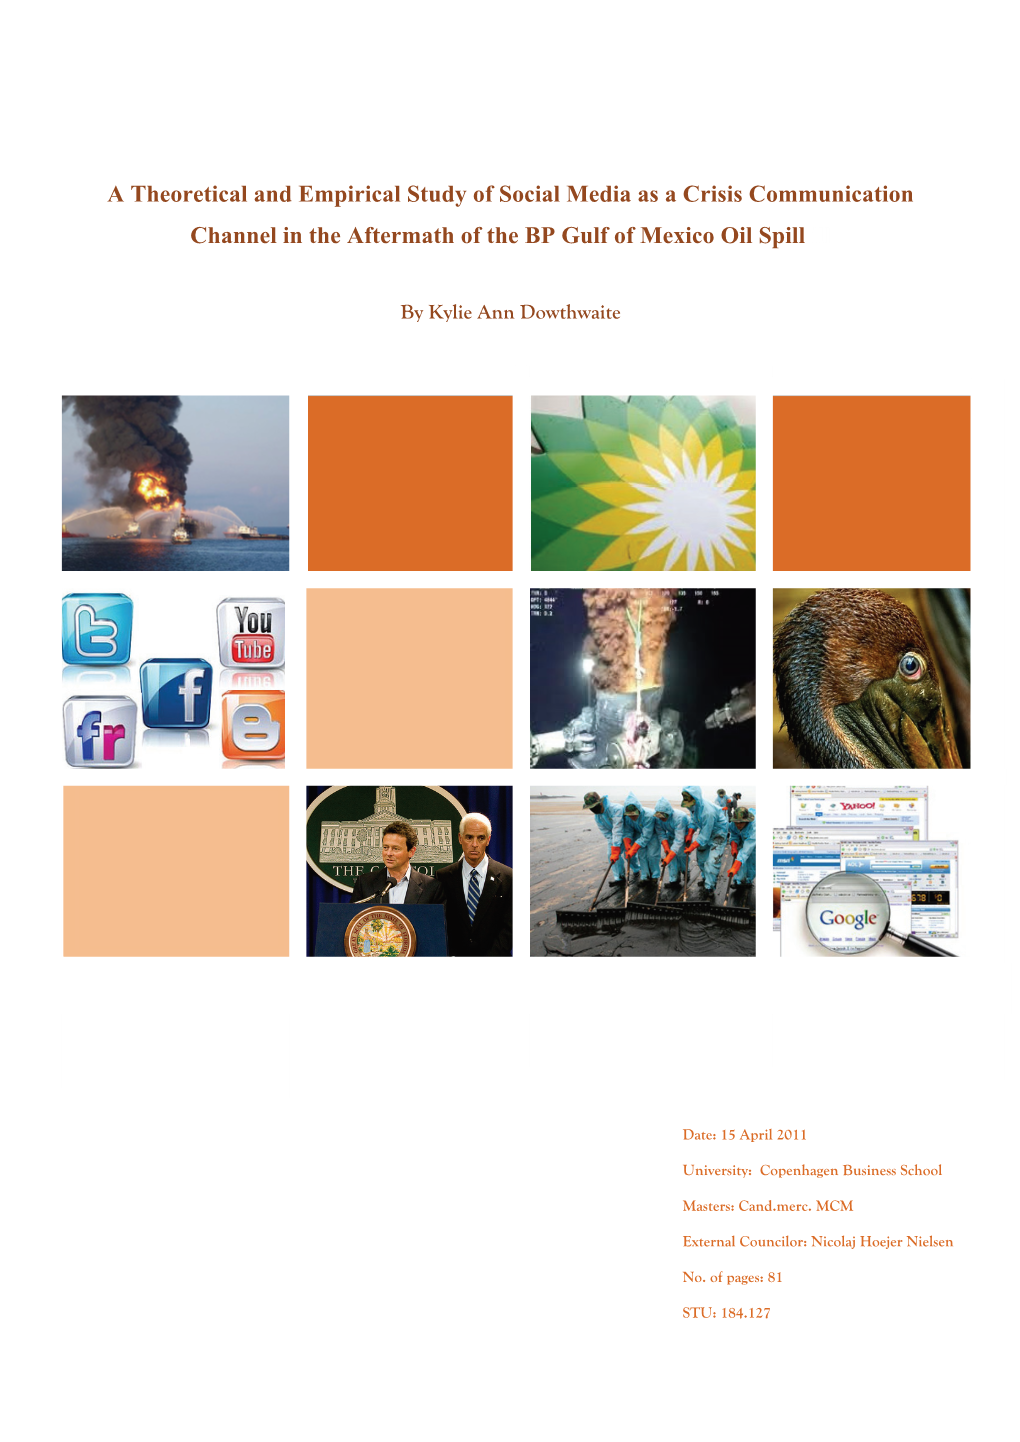 A Theoretical and Empirical Study of Social Media As a Crisis Communication Channel in the Aftermath of the BP Gulf of Mexico Oil Spill Ill